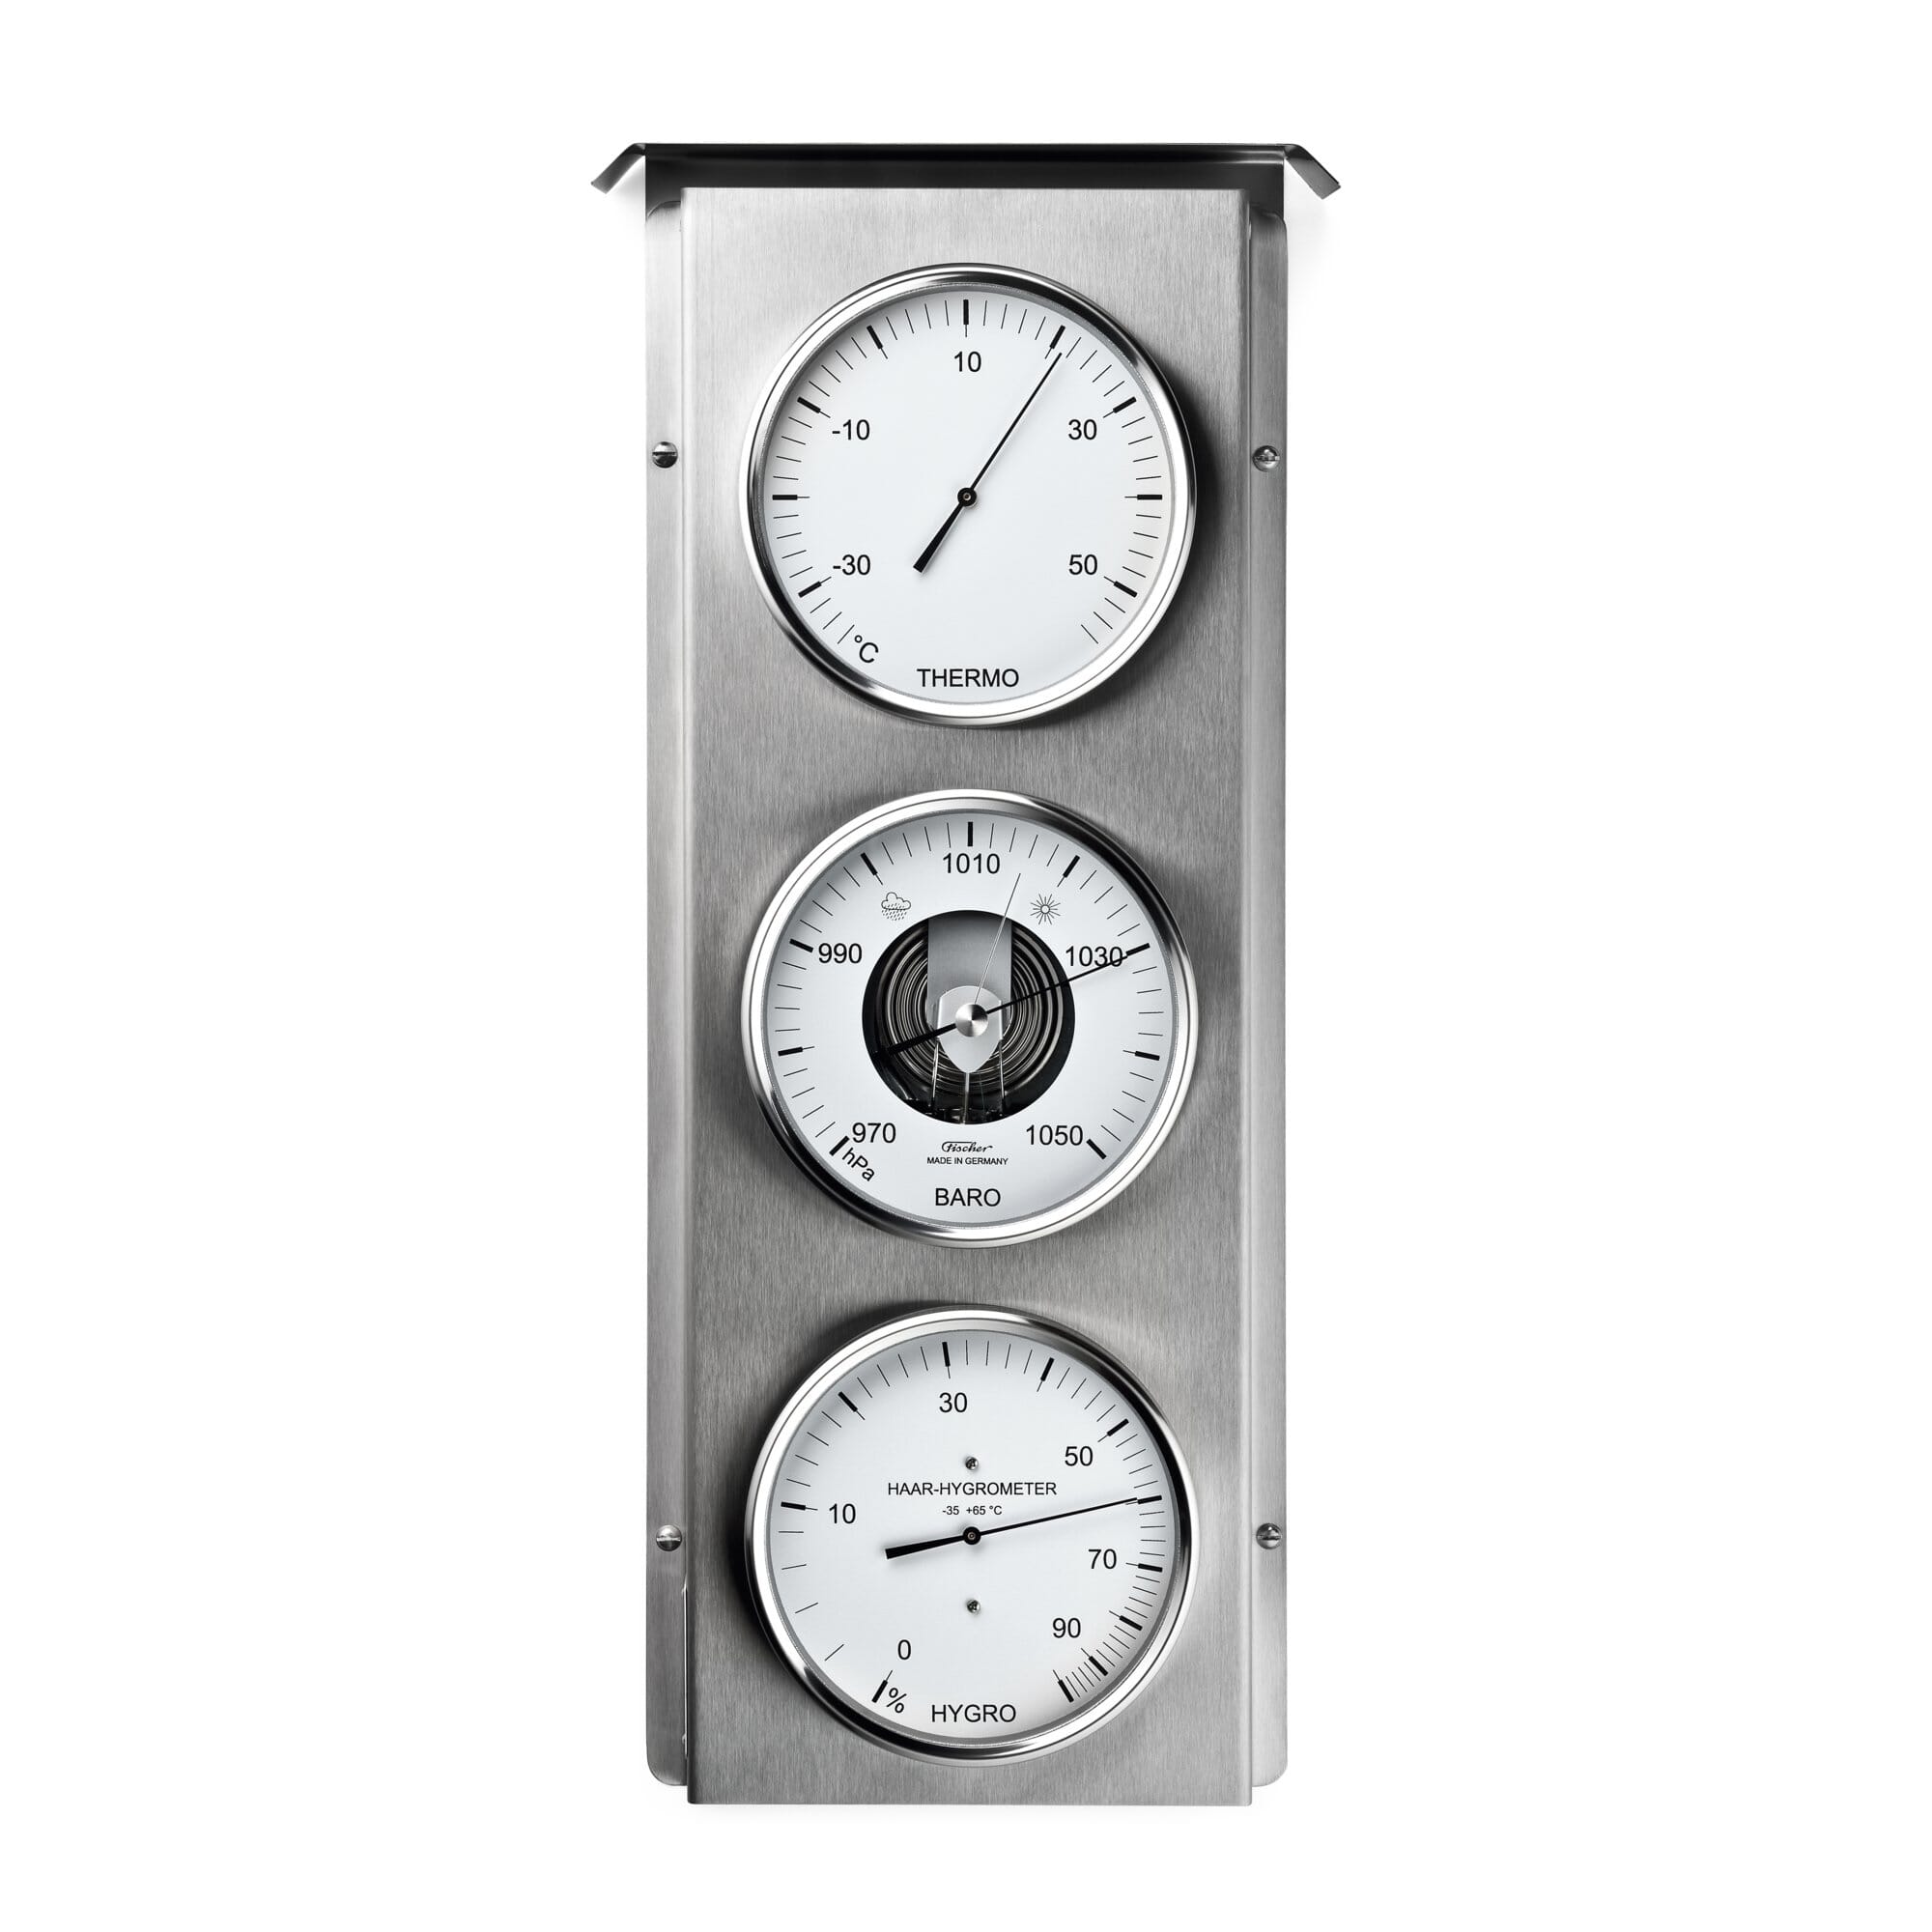 Outdoor weather station stainless steel